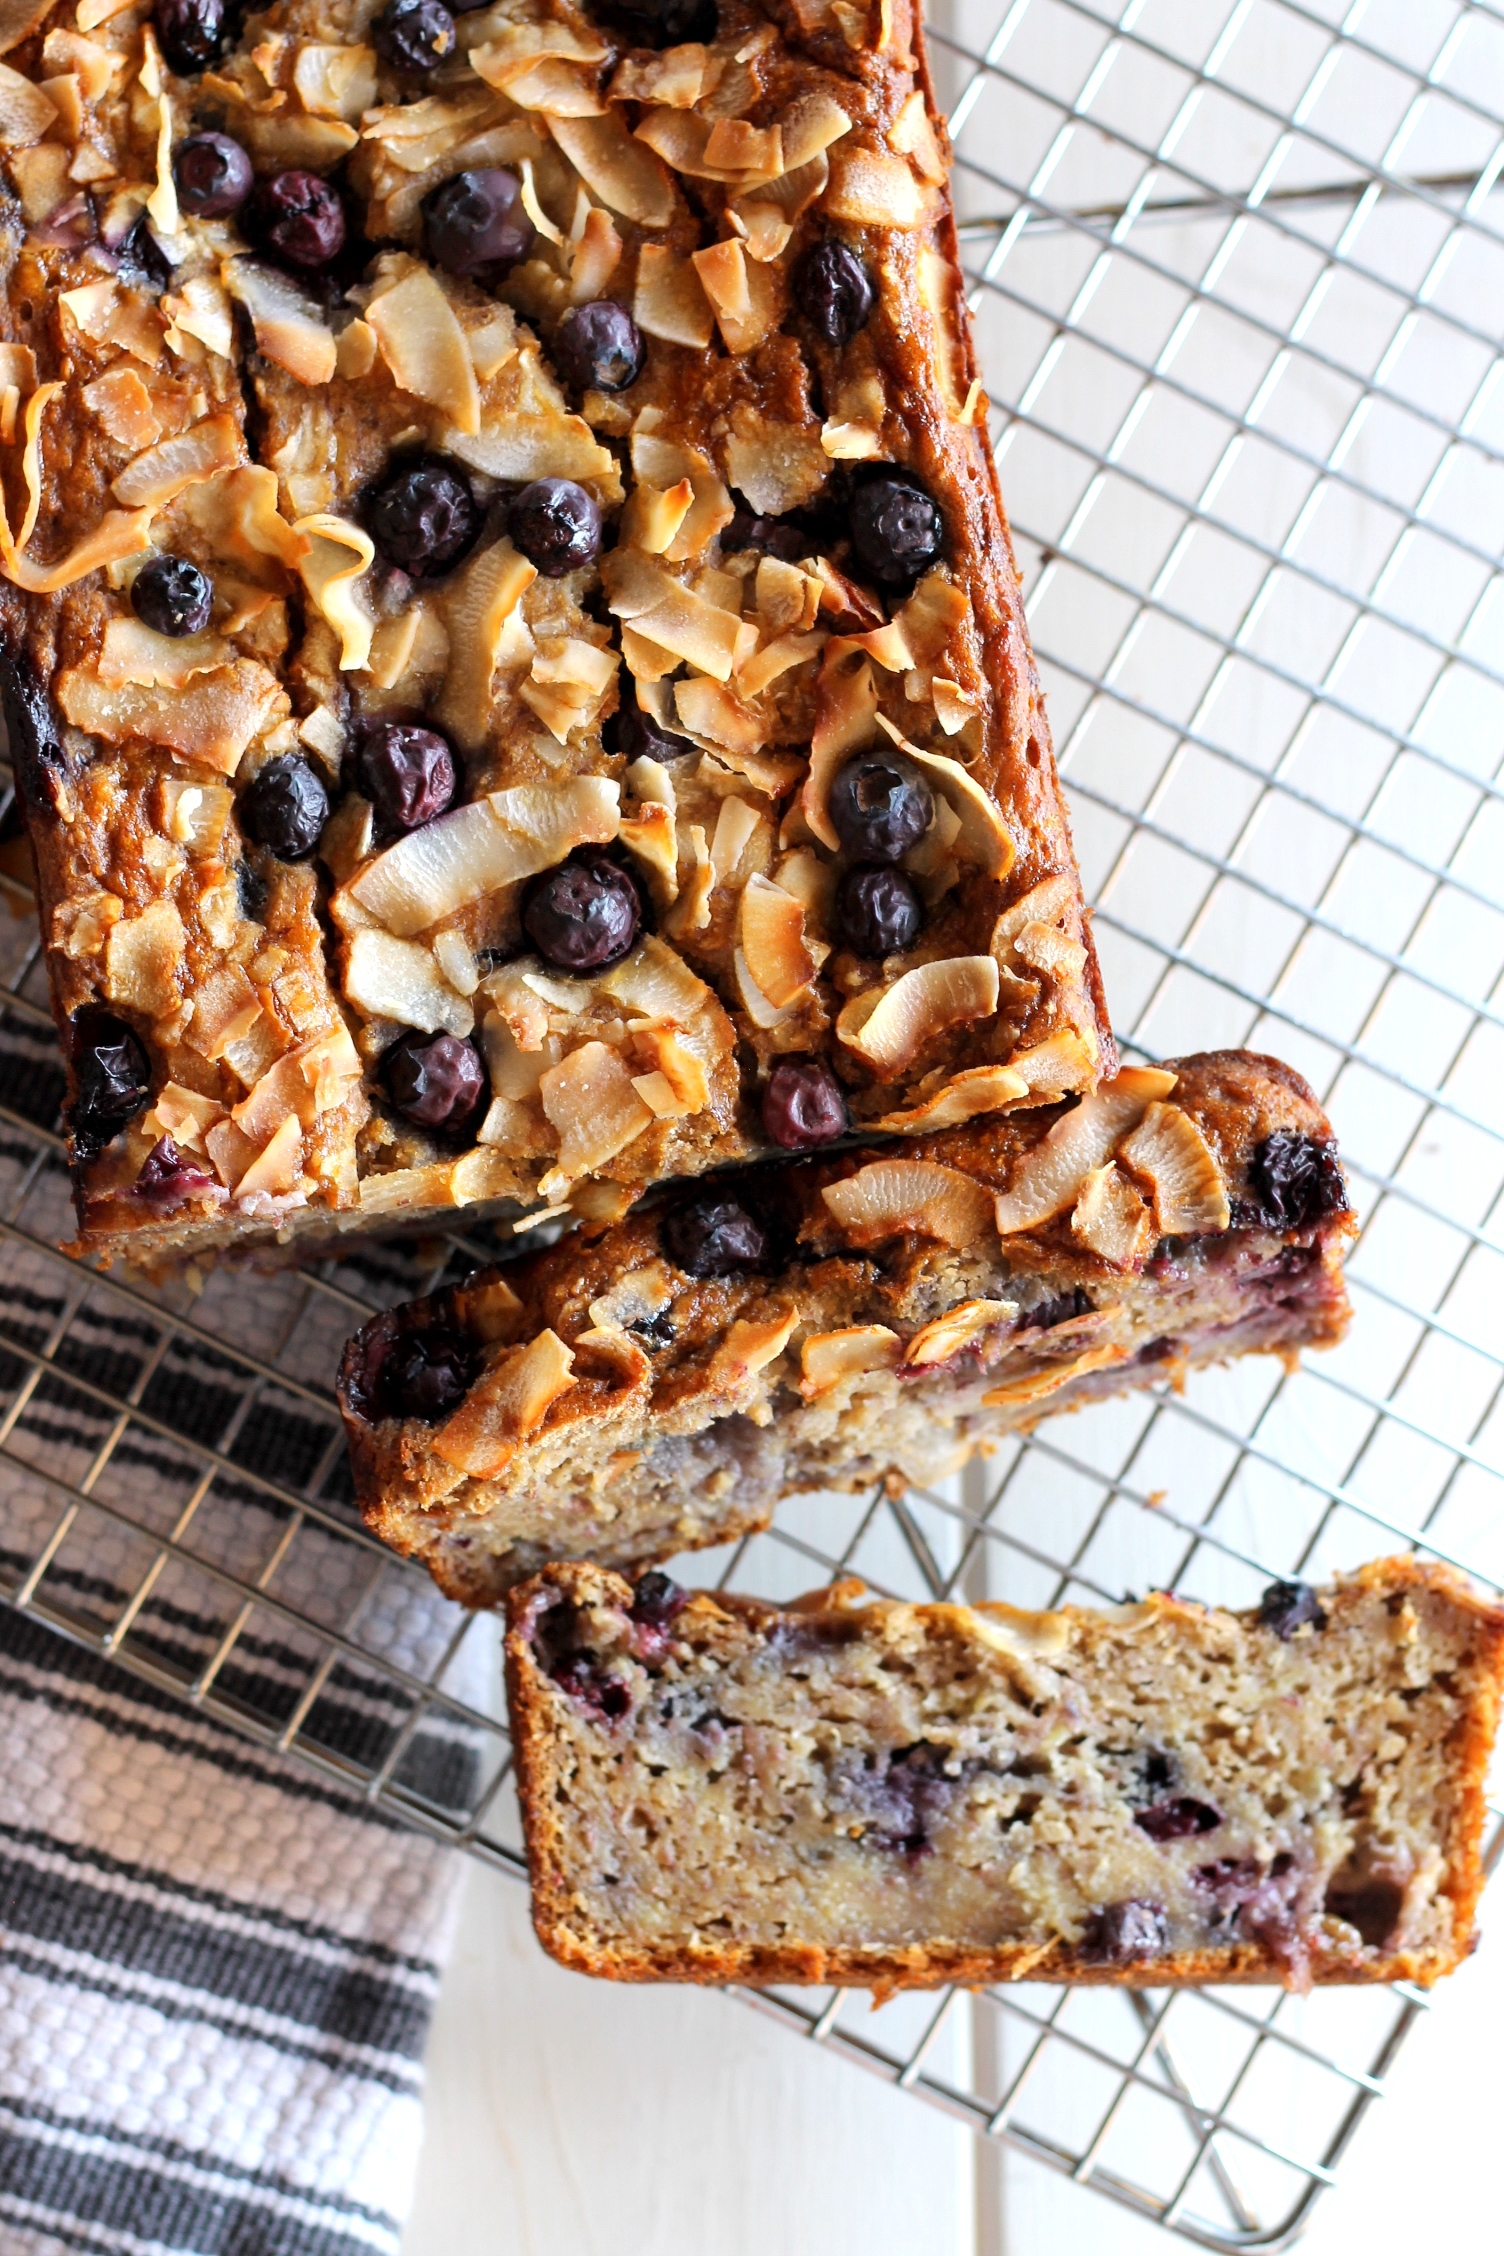 This Toasted Coconut Blueberry Banana Bread boasts delicious flavors - you'd never know that it was low-fat (no butter or oil!), low-sugar, and gluten-free! #bakerita #blueberrybread #bread #blueberries #glutenfree #quickloaf #coconut